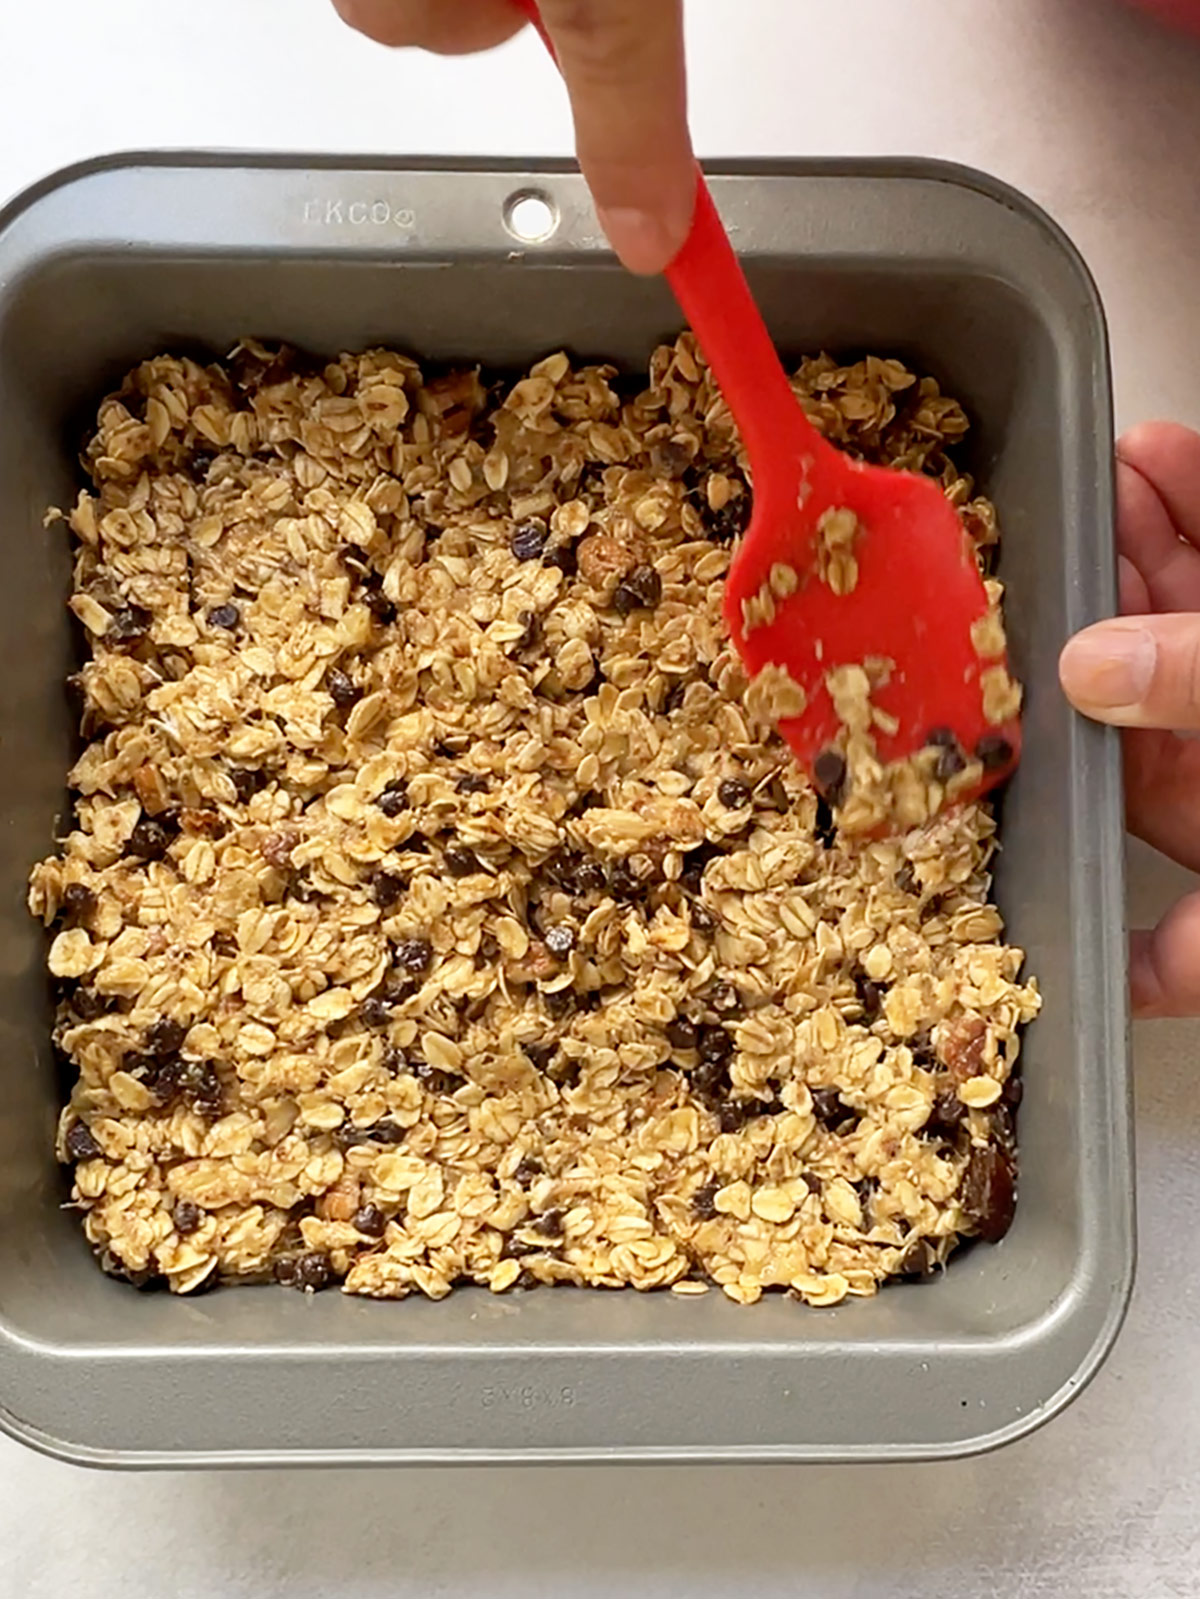 Peanut butter banana oat bars being spread in a grey square baking pan with a red spatula.